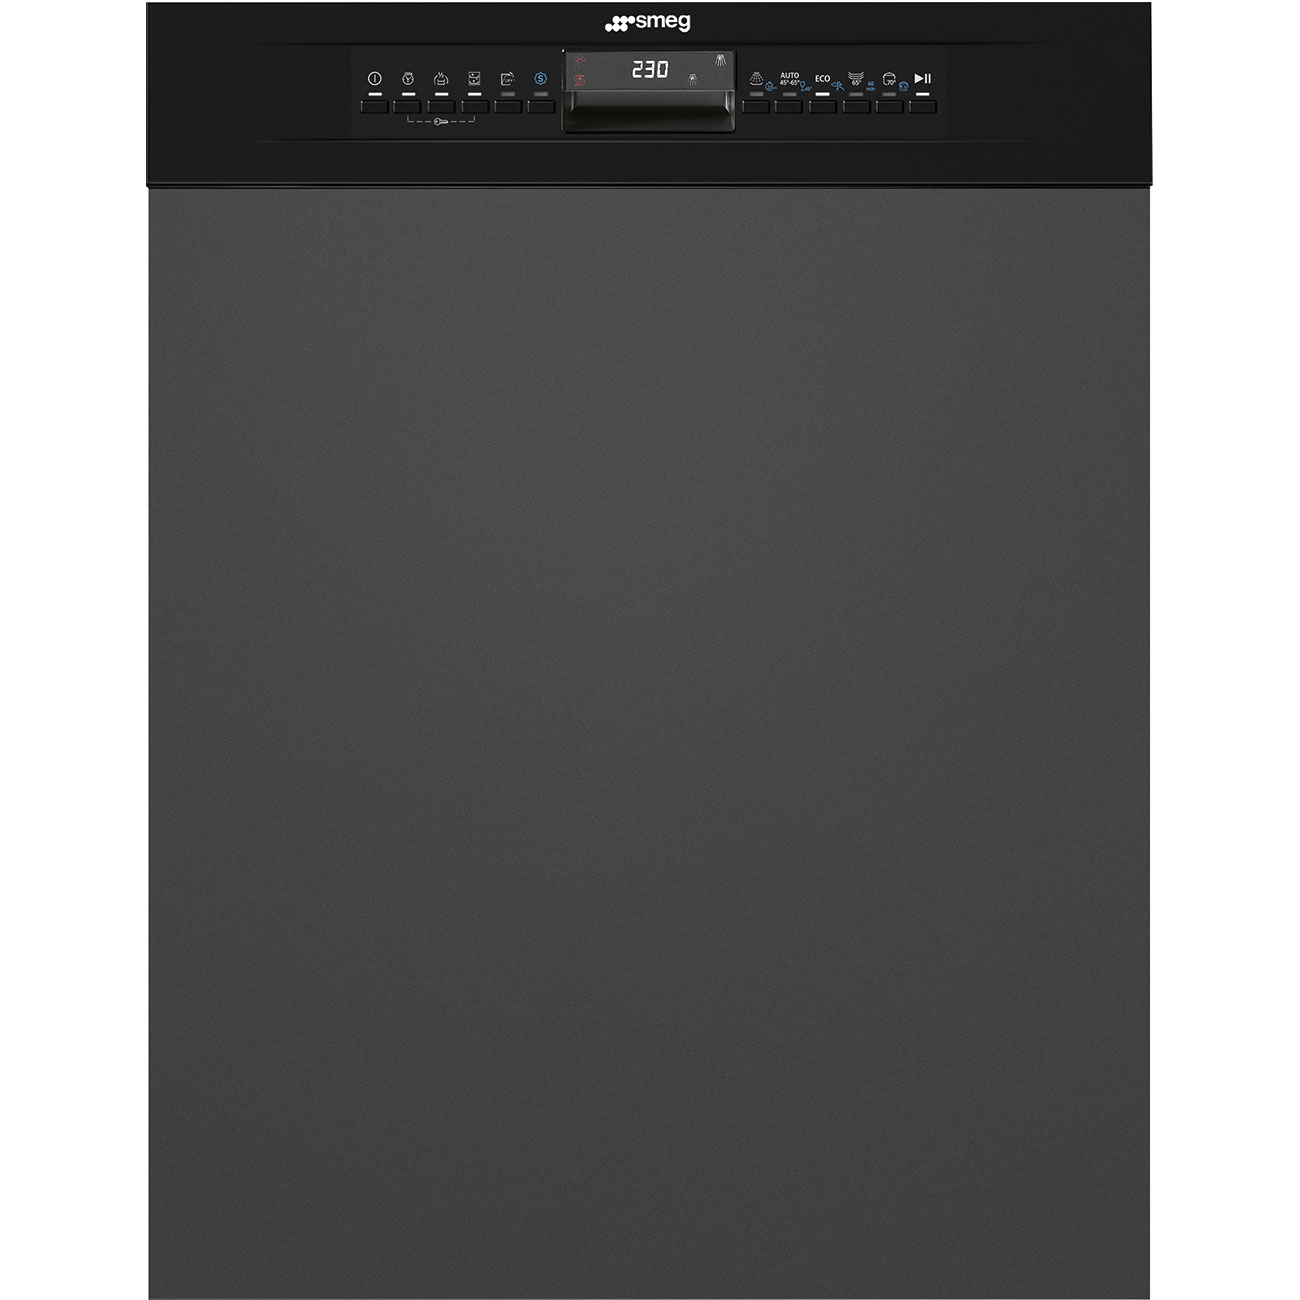 Partially-integrated built-in dishwasher 60 cm Smeg_1